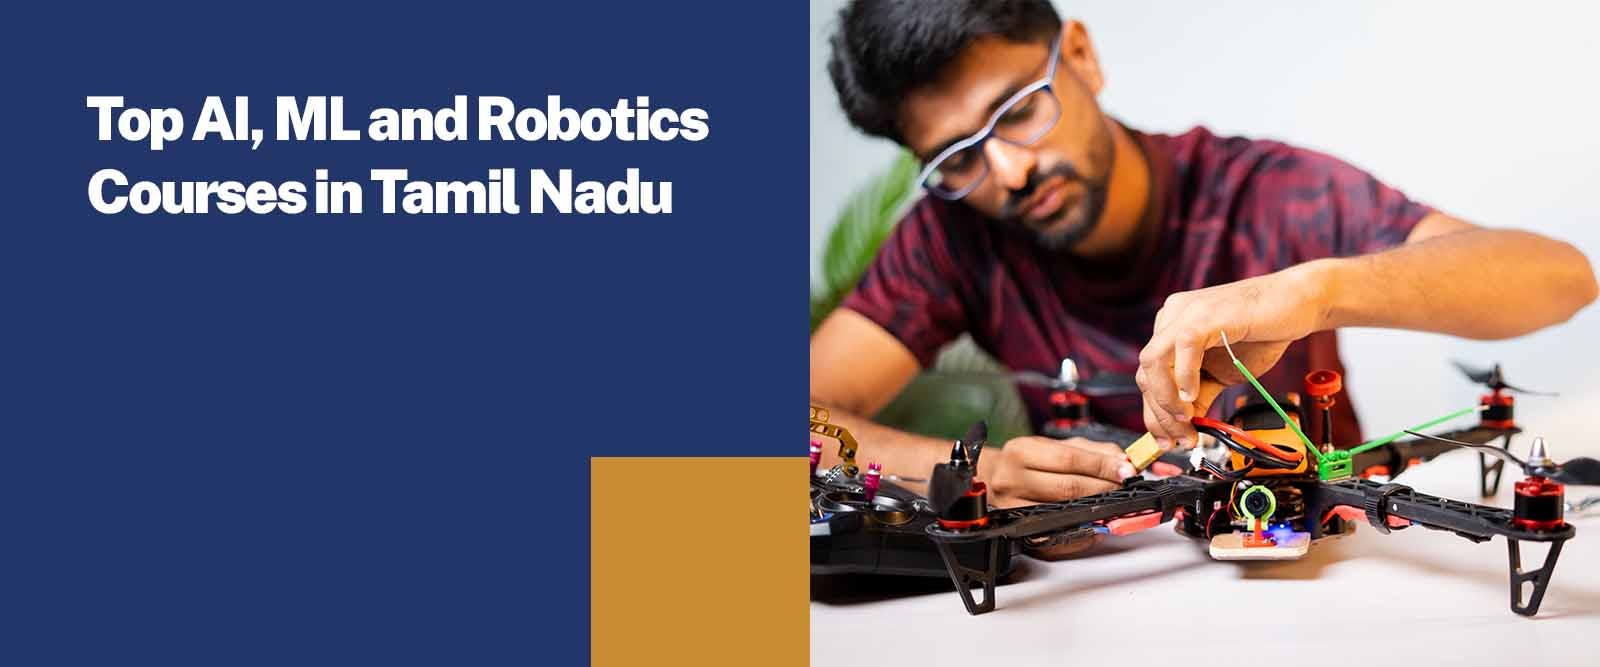 colleges in Tamil Nadu offer AI, ML, and robotics courses